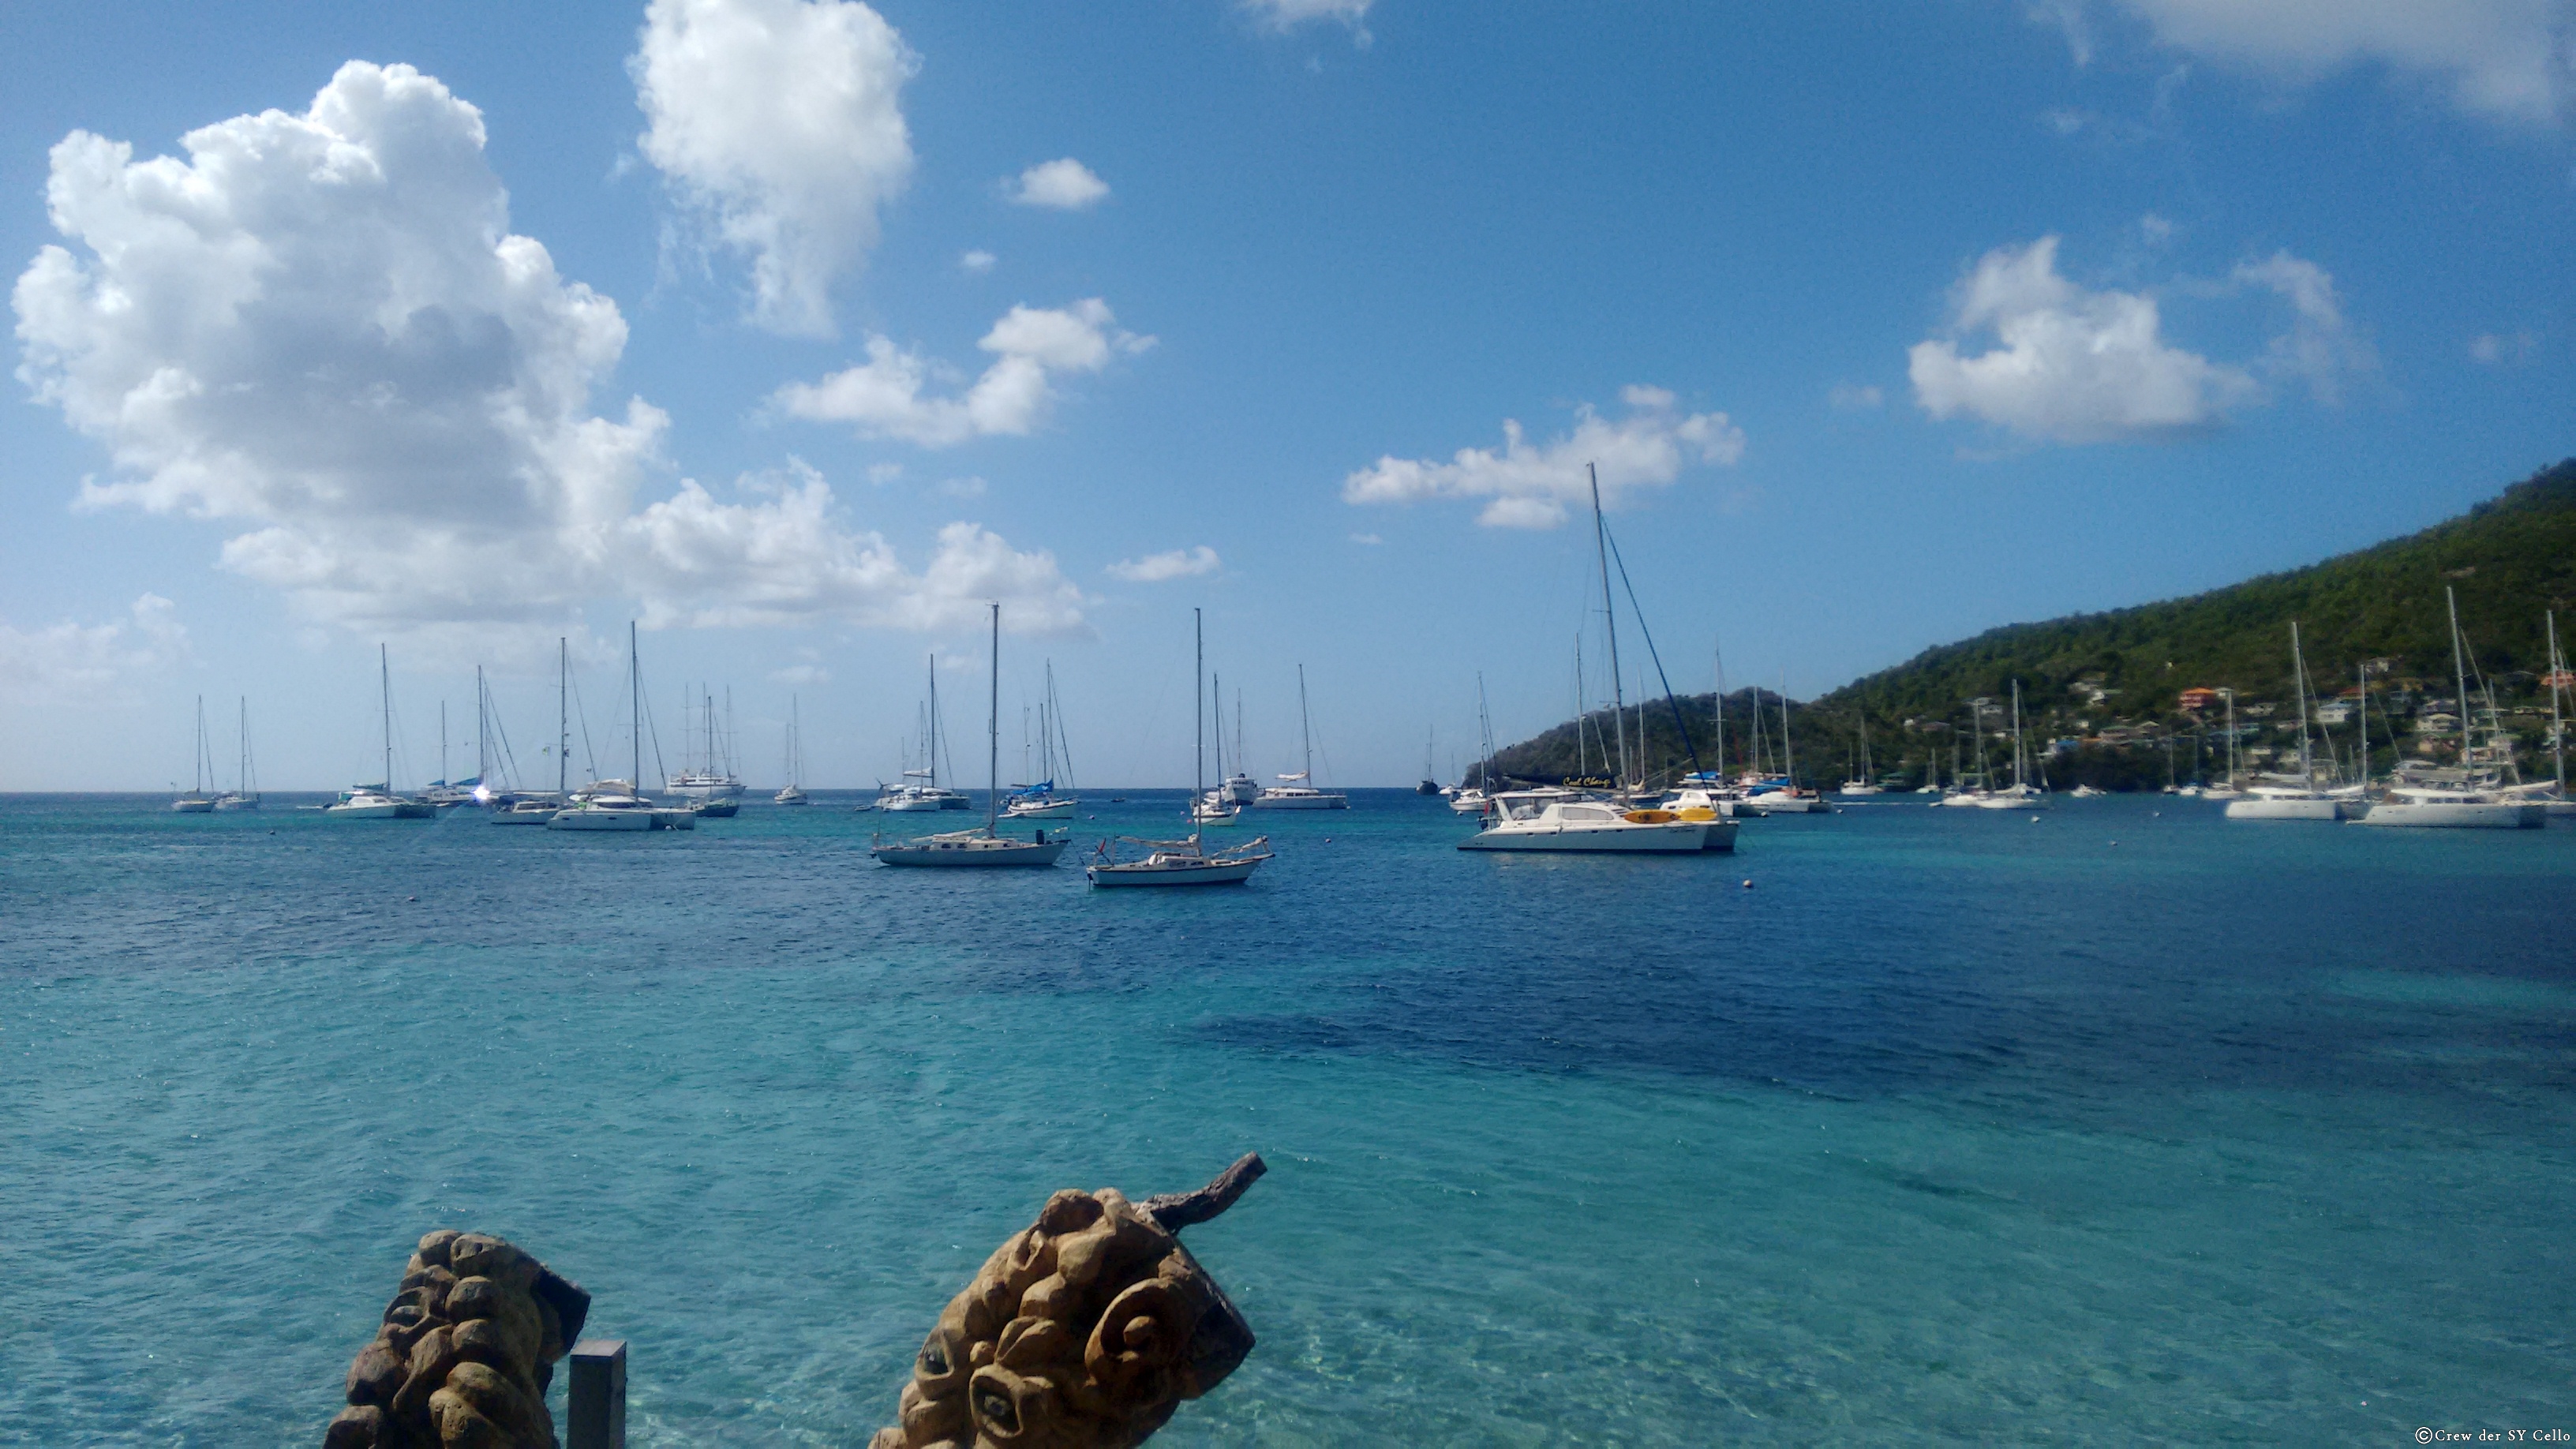 &lsquo;Admirality Bay&rsquo; in Bequia